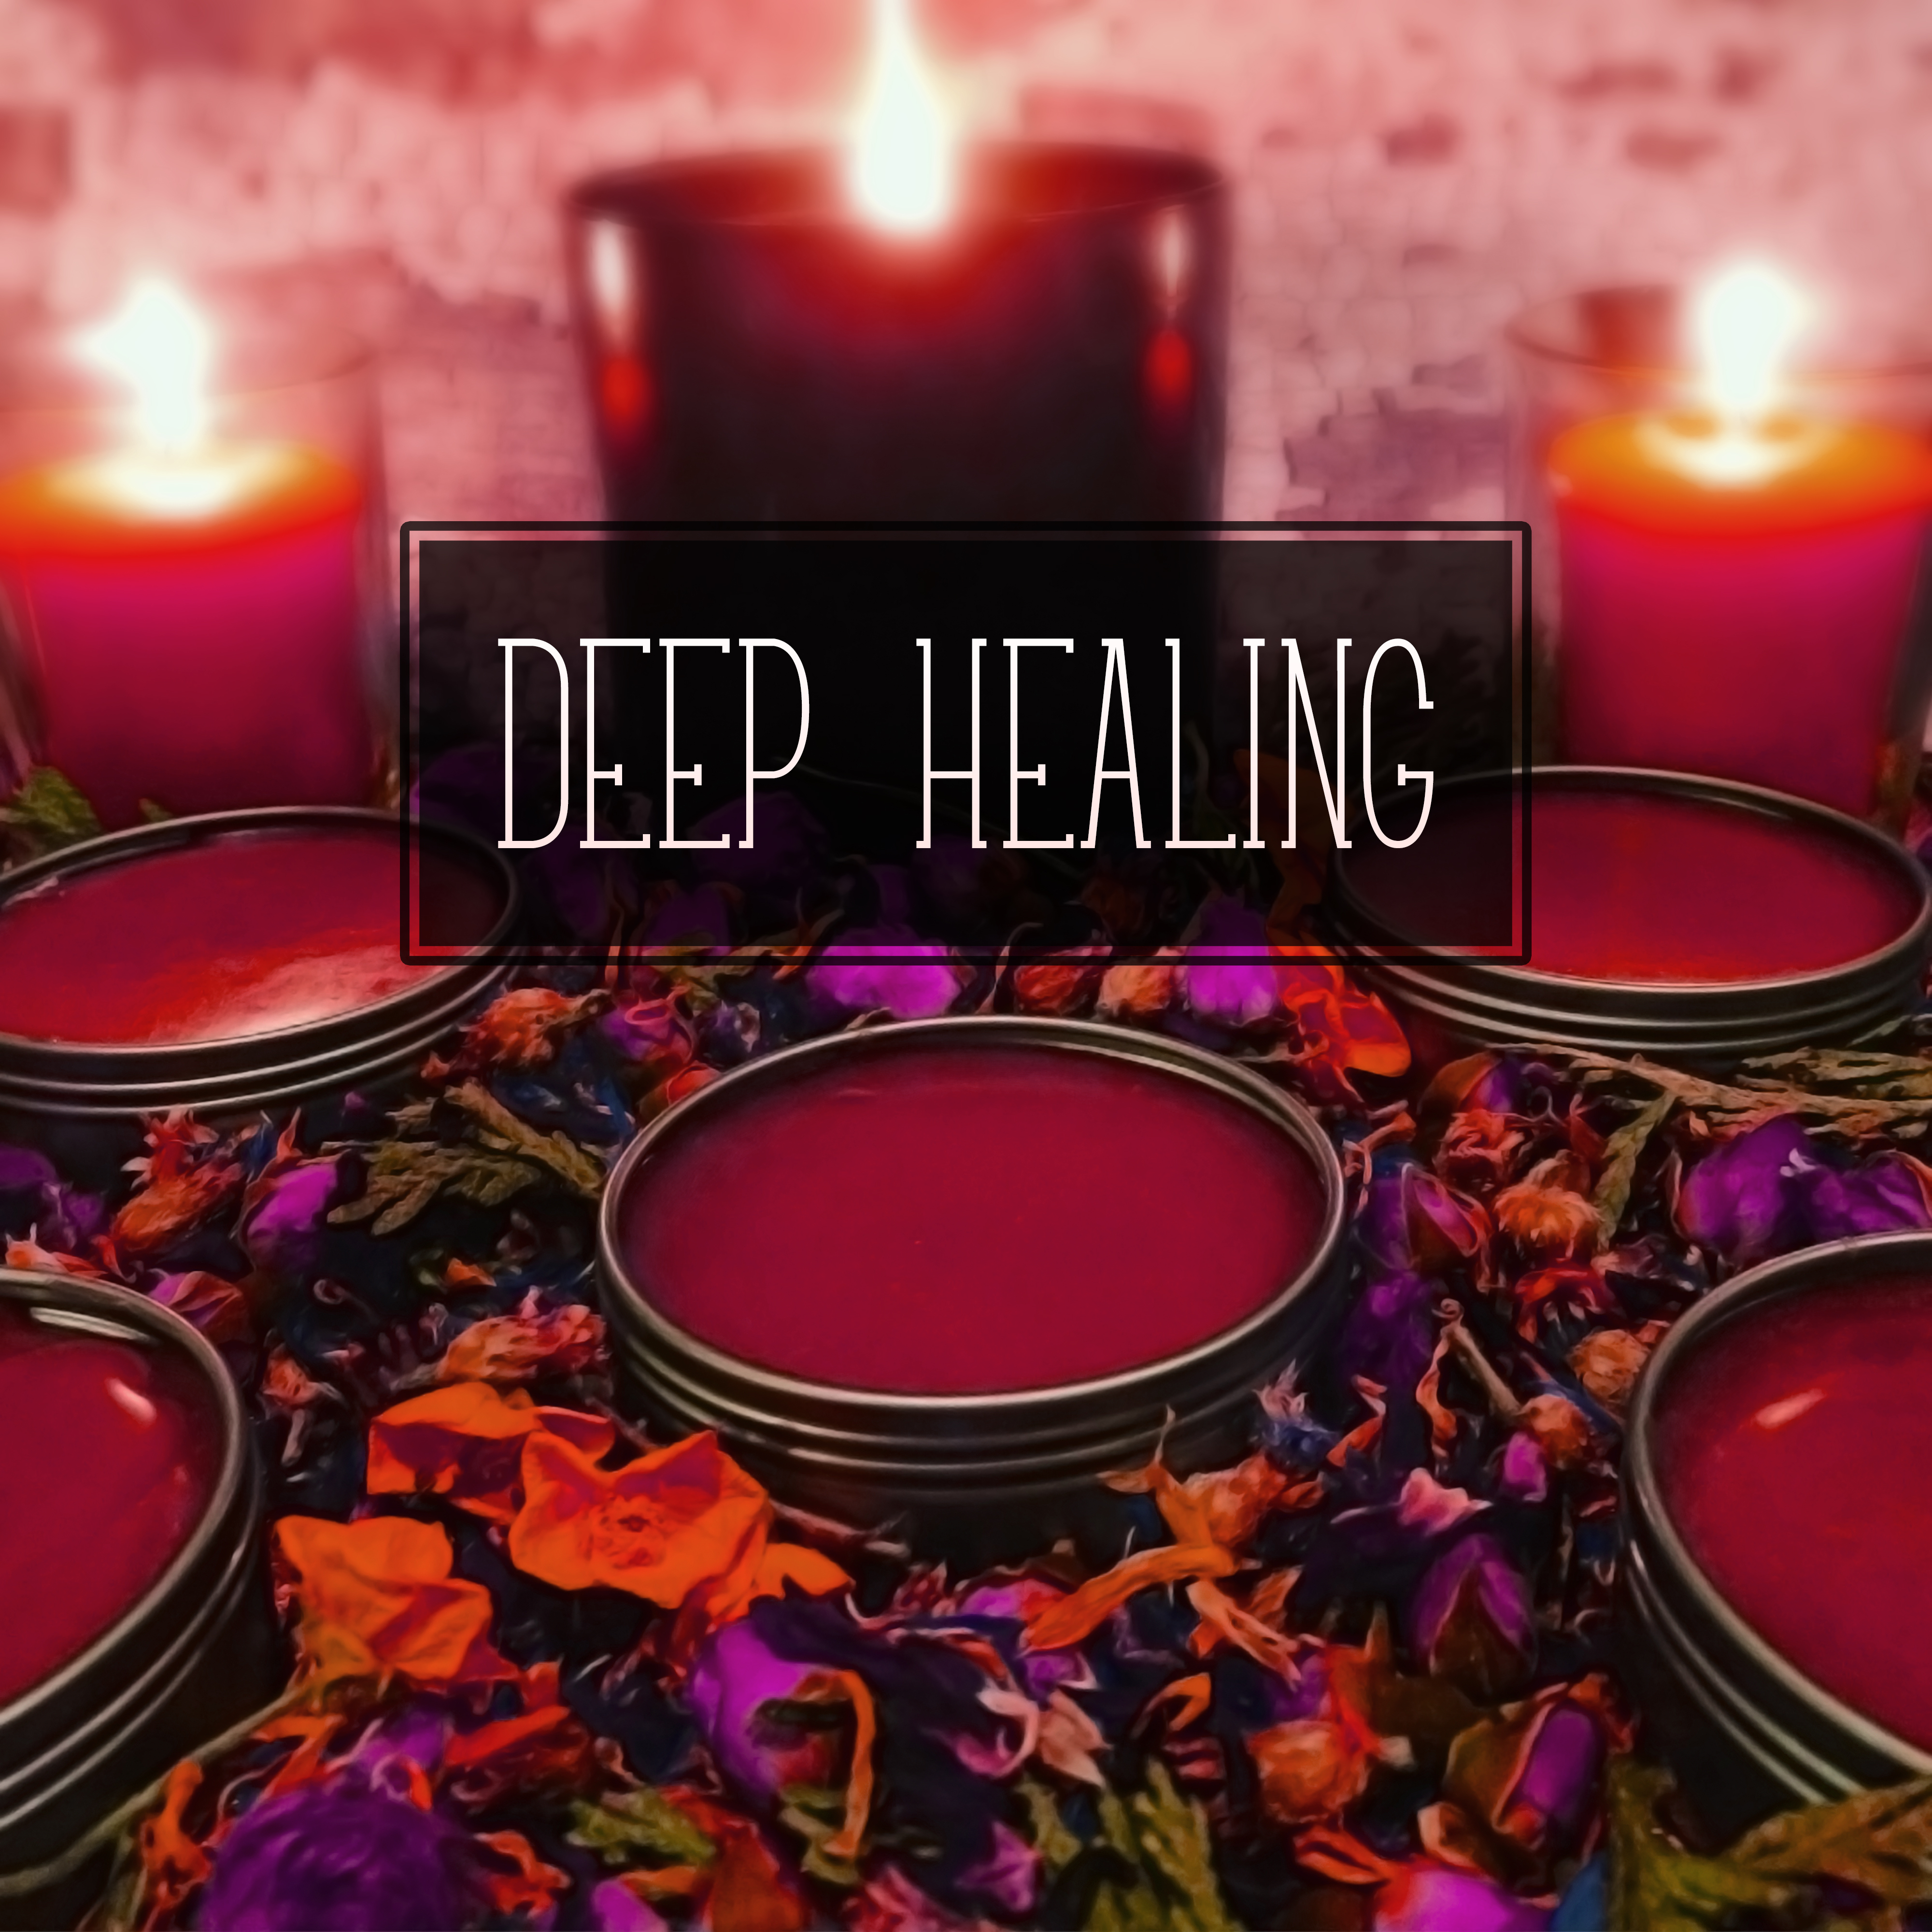 Deep Healing – Ocean Waves for Relaxation, Pure Massage, Bliss Spa, Tranquility for Body